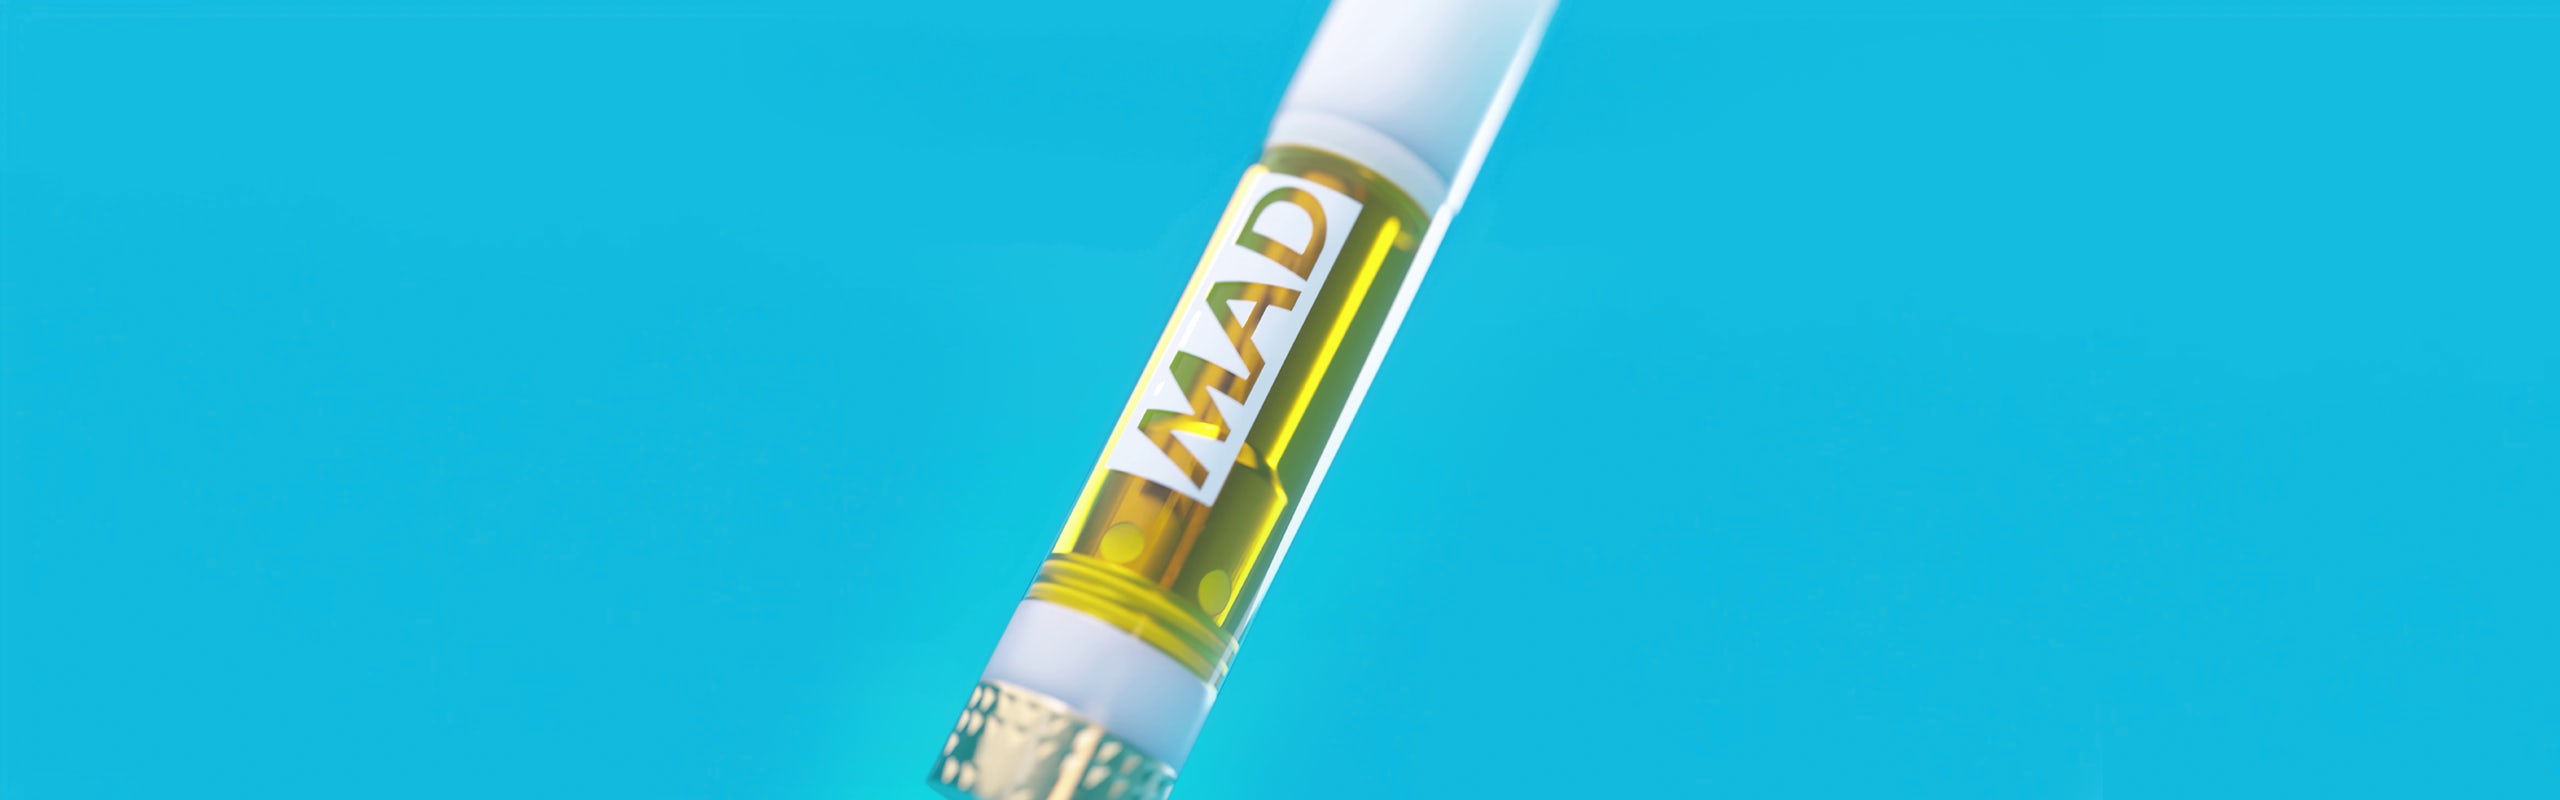 Mad Labs banner